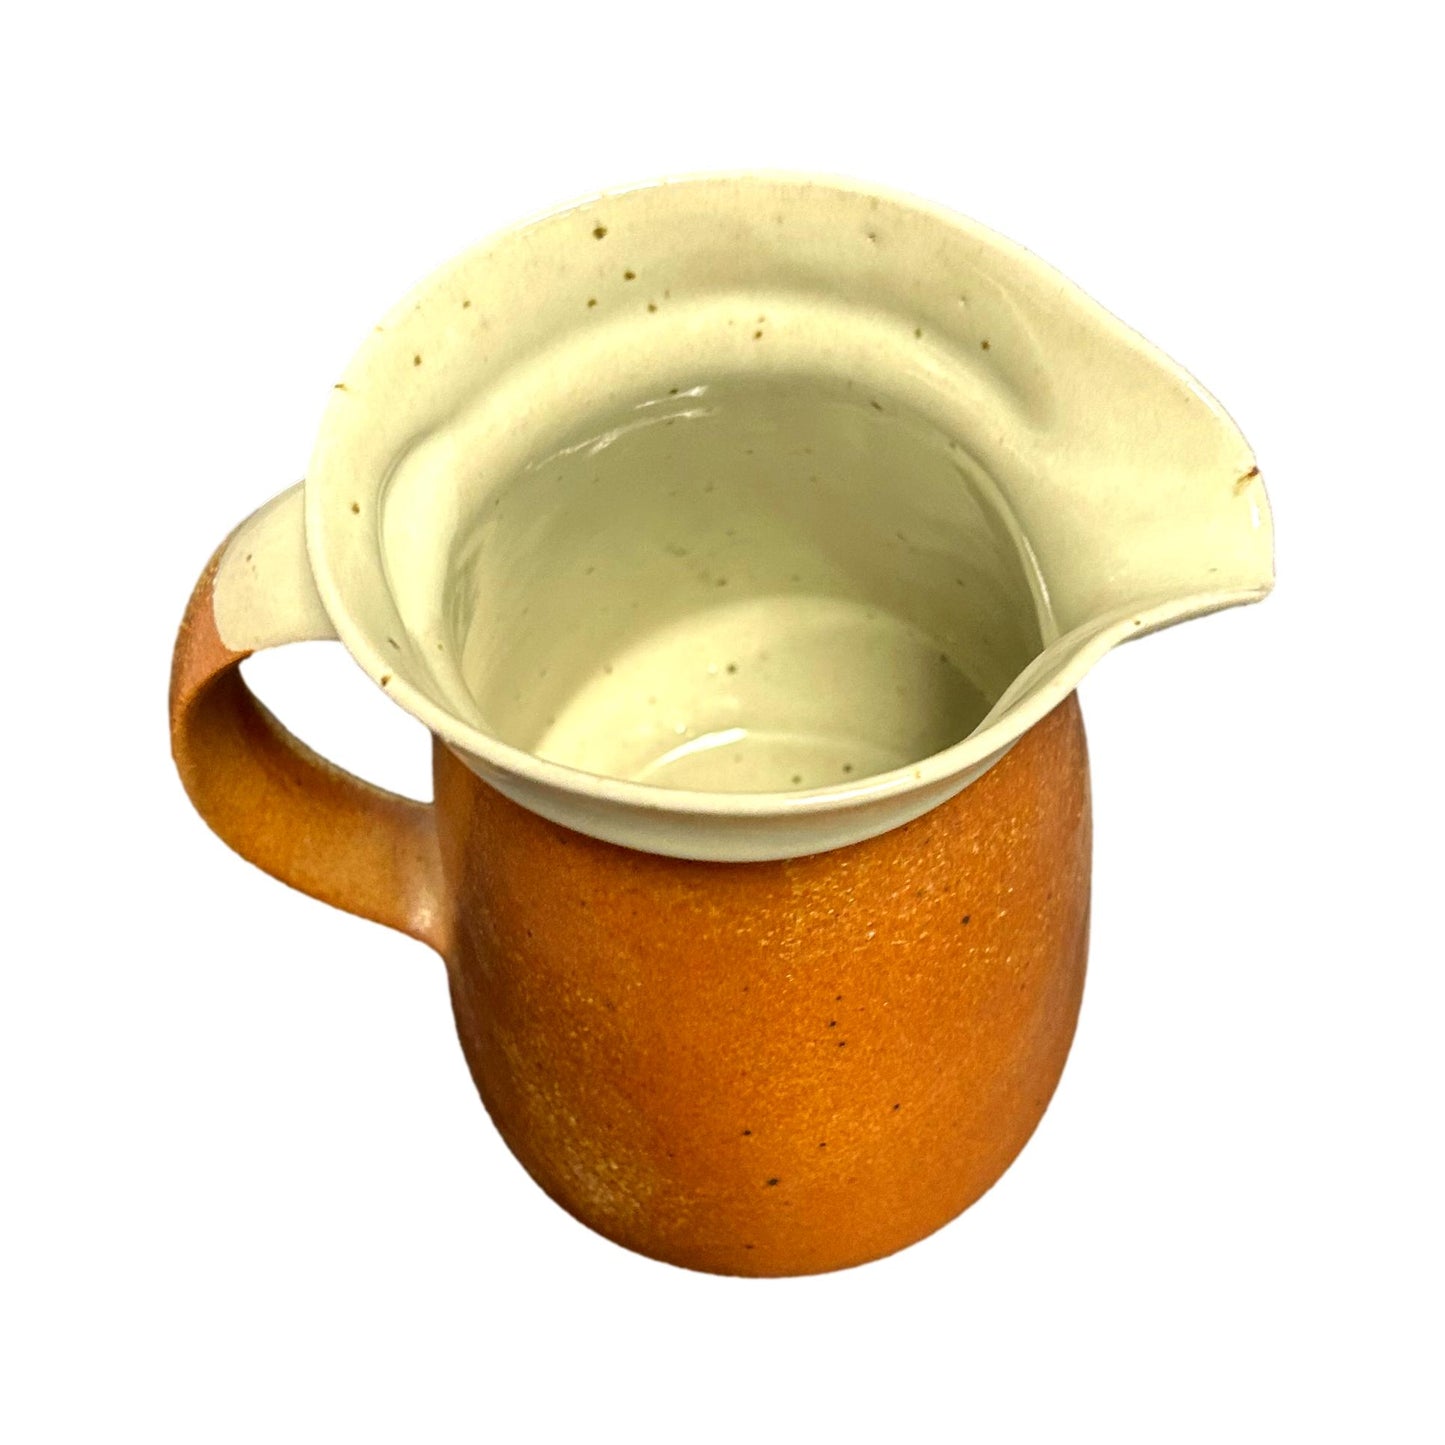 Vintage Sial Pitcher